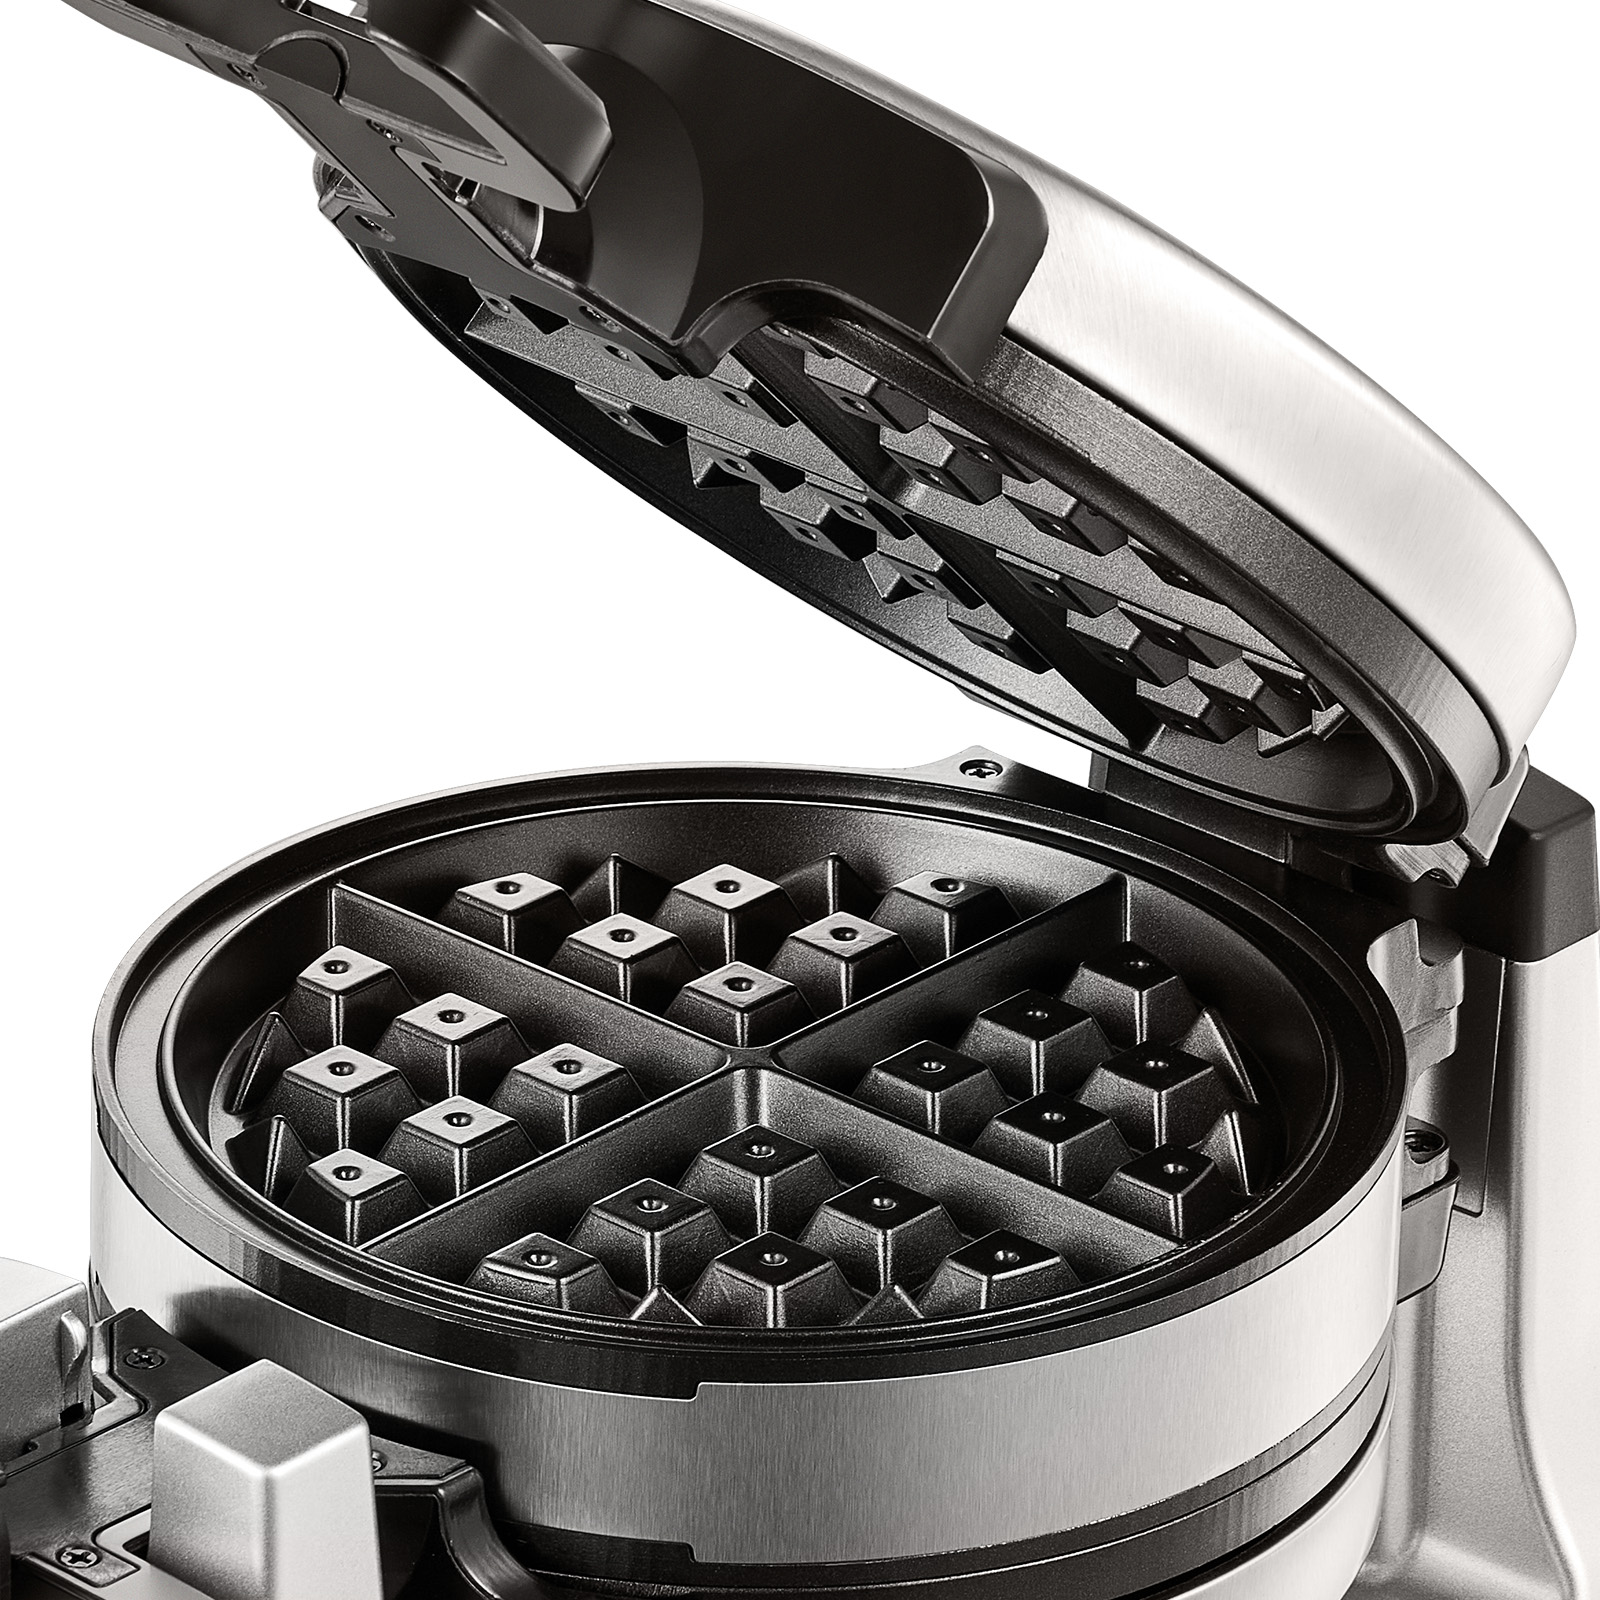 VEVOR Silver Stainless Steel Waffle Maker, 1400W, Removable Drip Tray, Non-Stick, Flippable, Round Shape